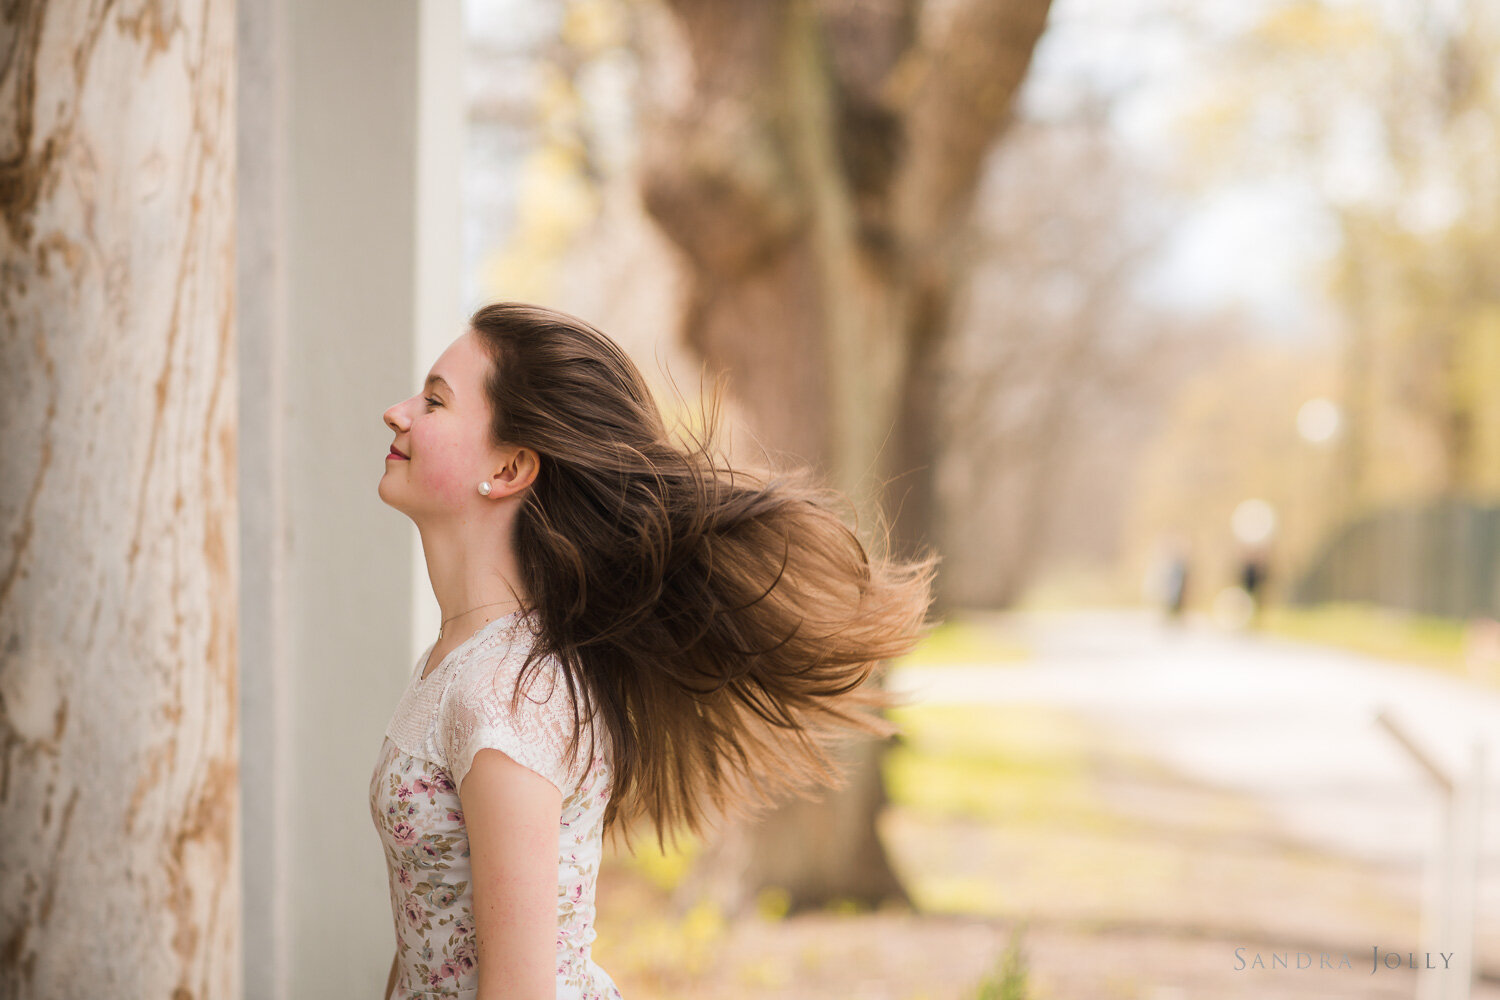 photo-of-teen-girl-with-hair-blowing-in-the-wind-by-sandra-jolly.jpg